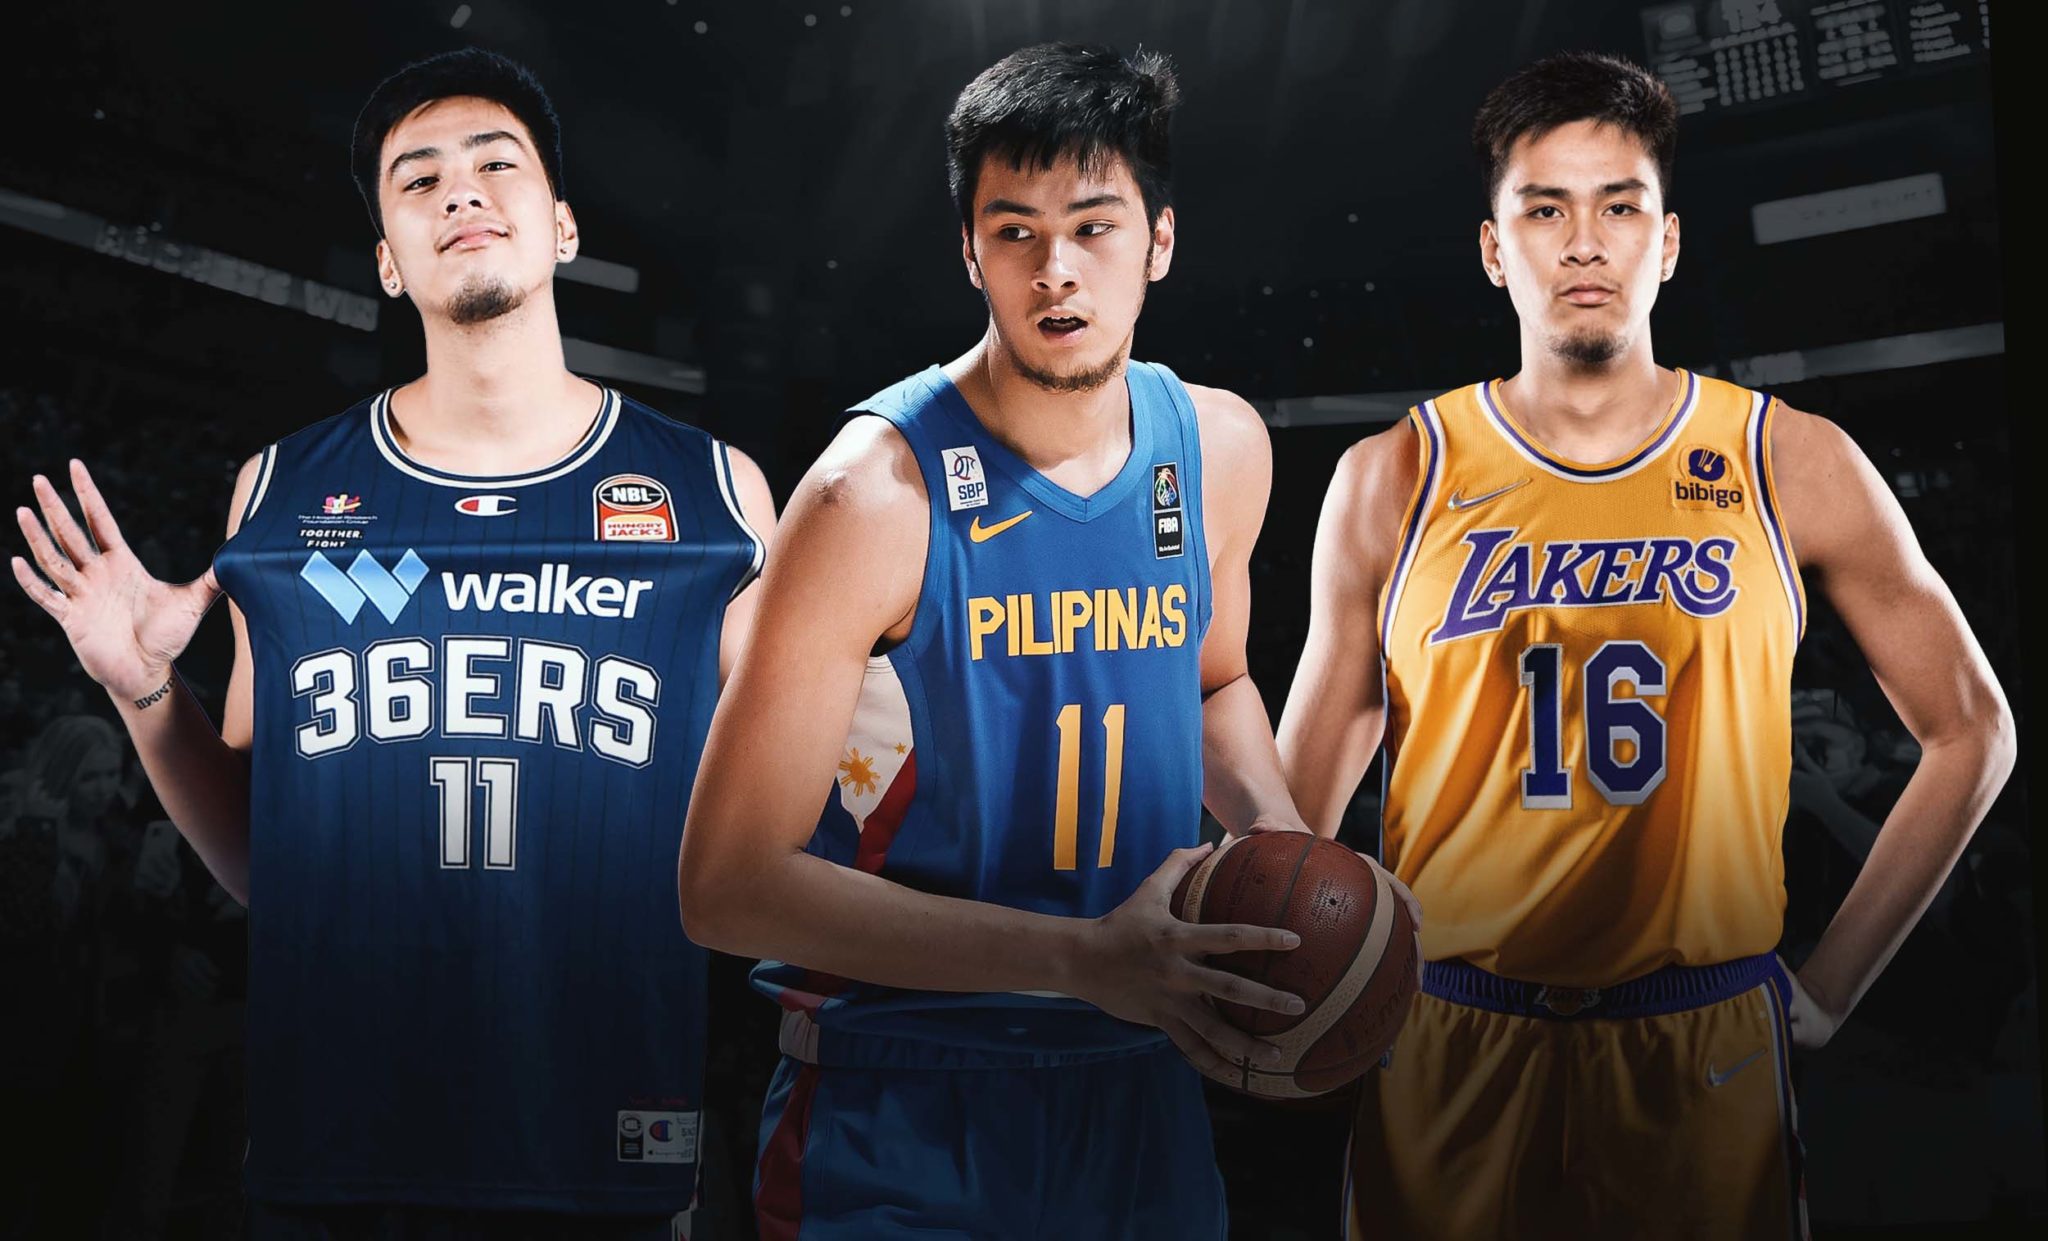 The 7’3 Teenager Carrying the Dreams of the Basketball-Obsessed Philippines